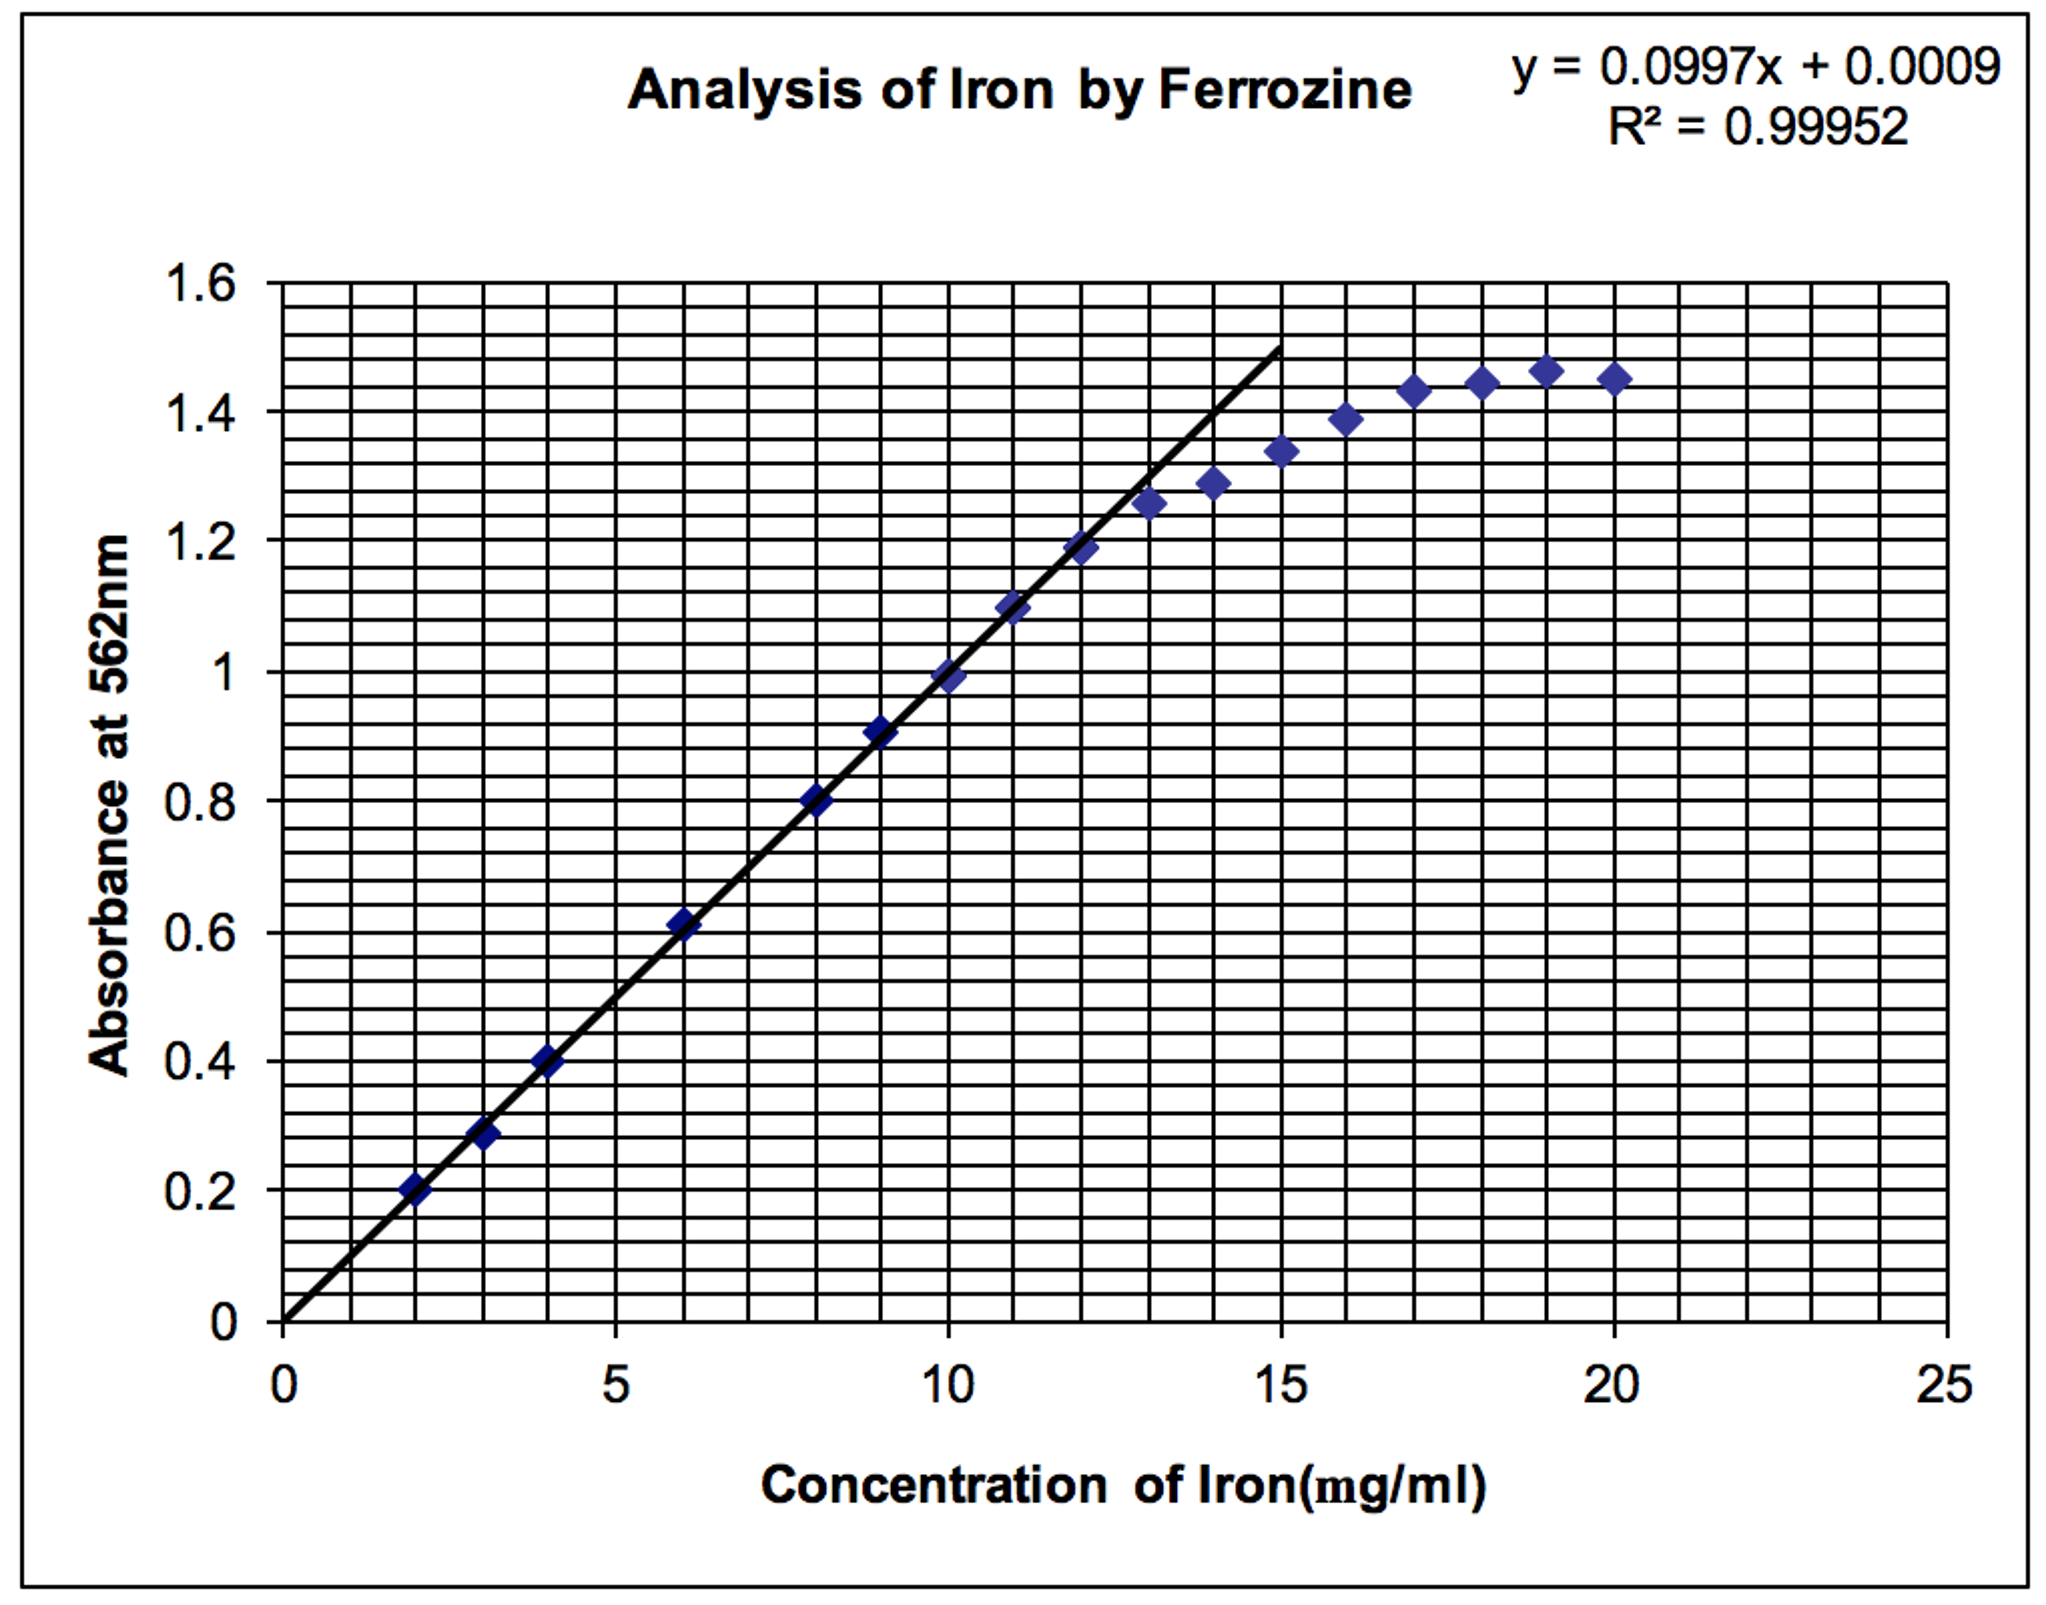 Analysis of lron by Ferrozine y = 0.0997x 0.0009 R = 0.99952 nalysis of Tron 1.6 E 1.2 a 0.8 ? 0.6 0.4 0.2 0 5 10 15 20 25 Concentration of Iron(mg/ml)